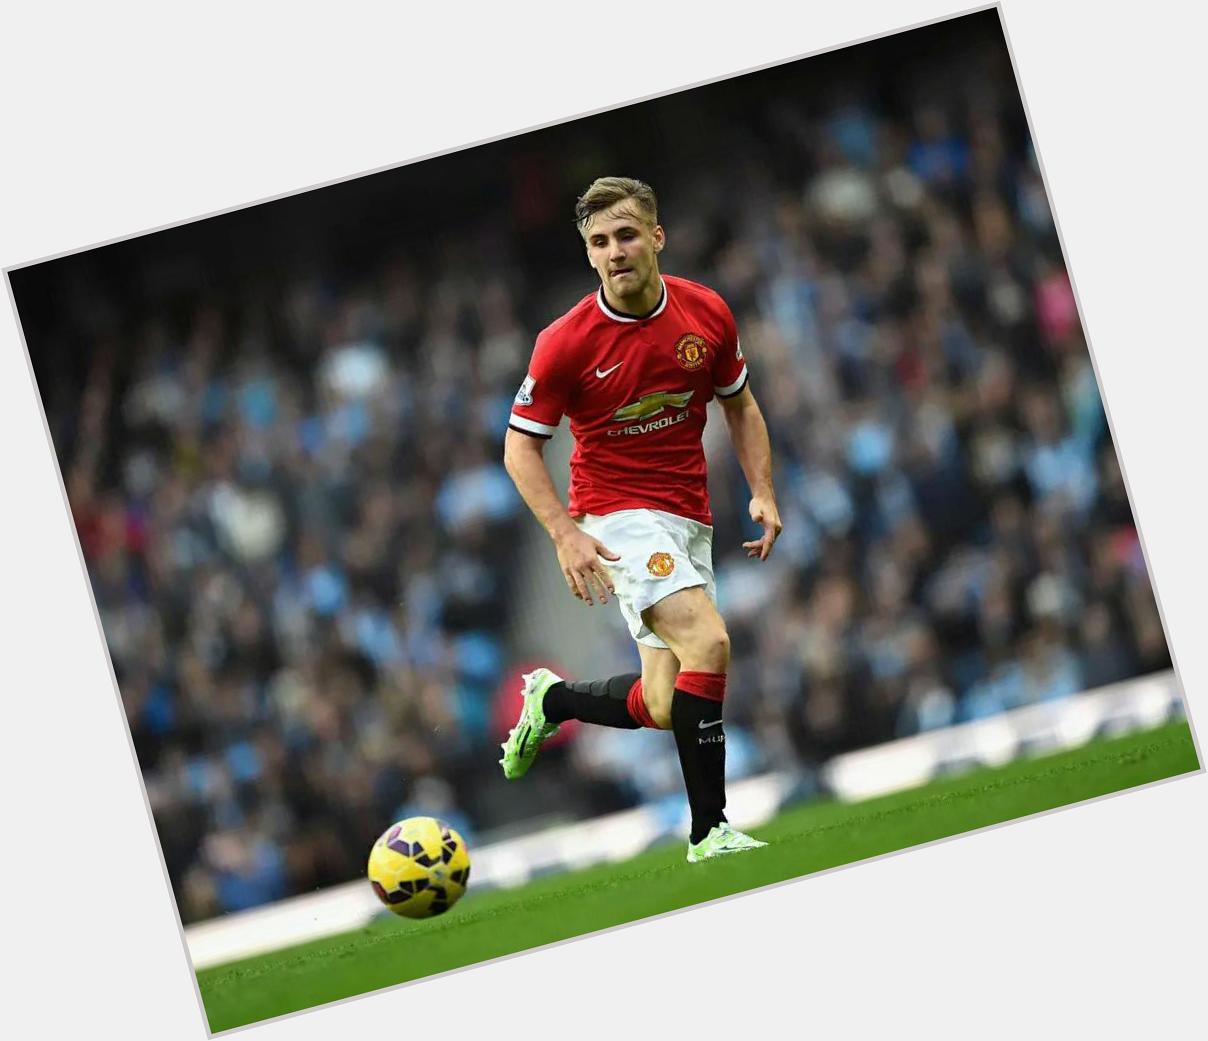 Happy birthday Luke Shaw! Have a great day lad. 